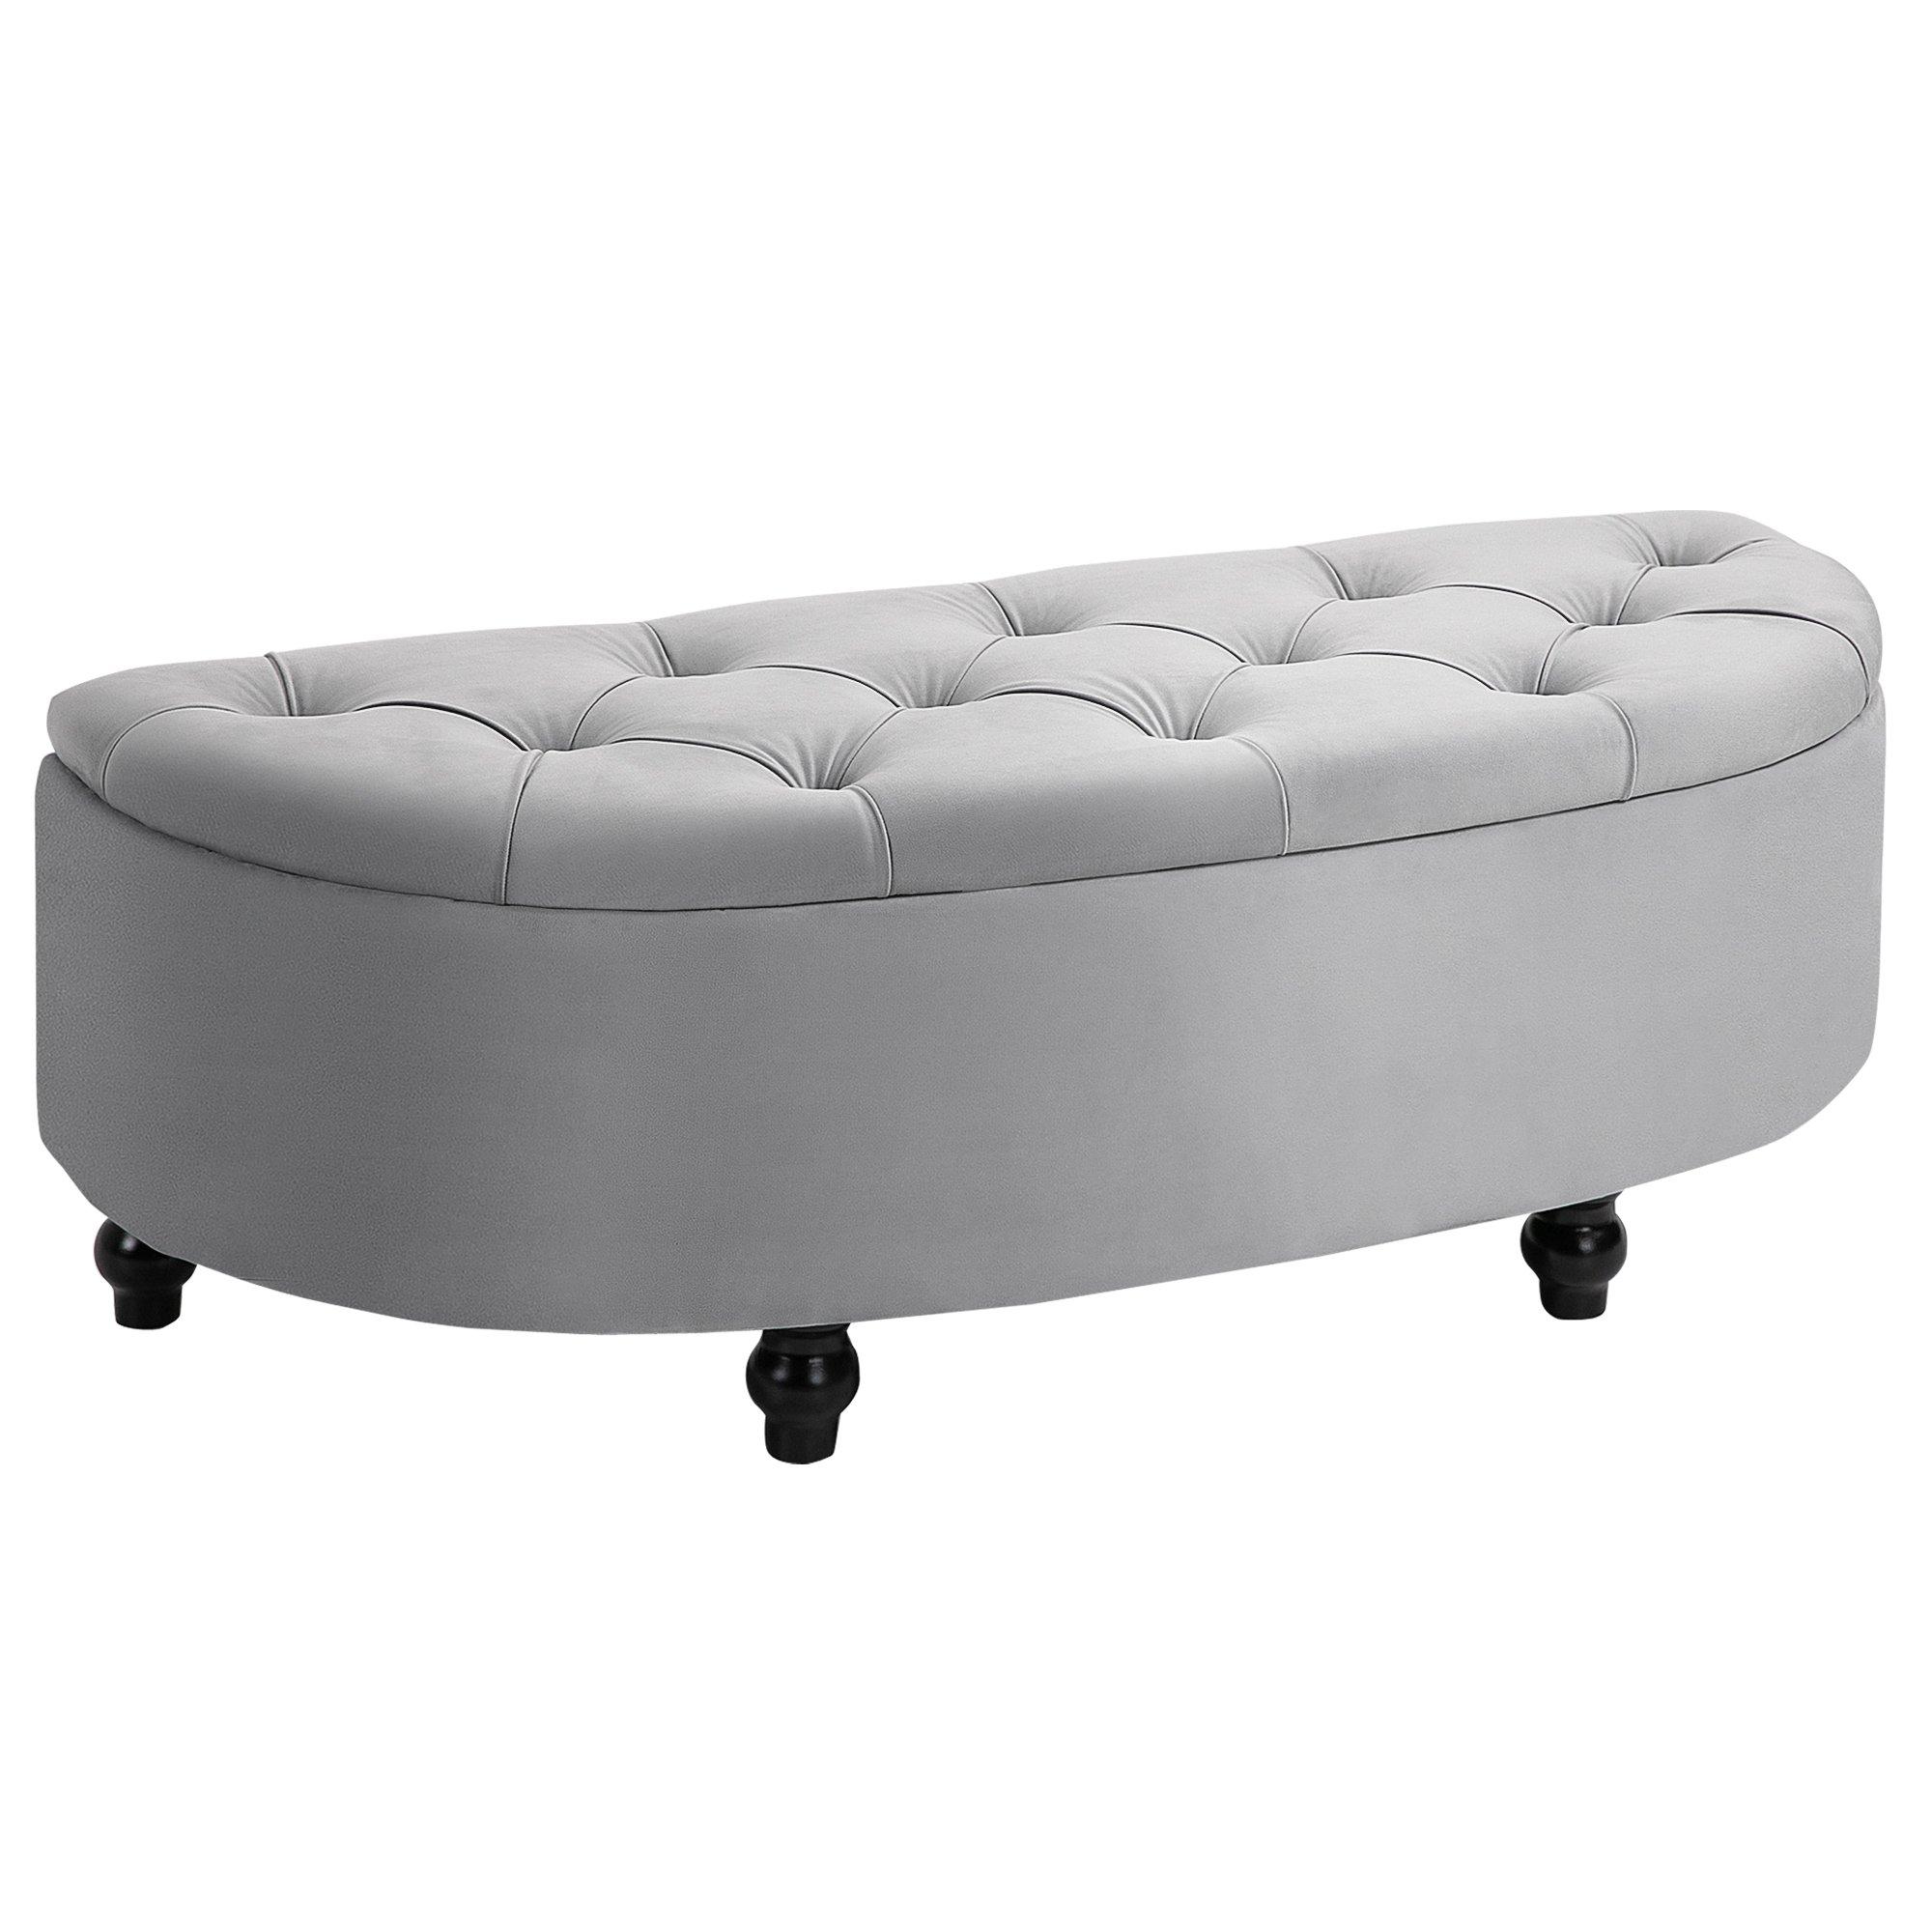 Semi Circle Bed End Bench Ottoman with Storage Tufted Accent Seat